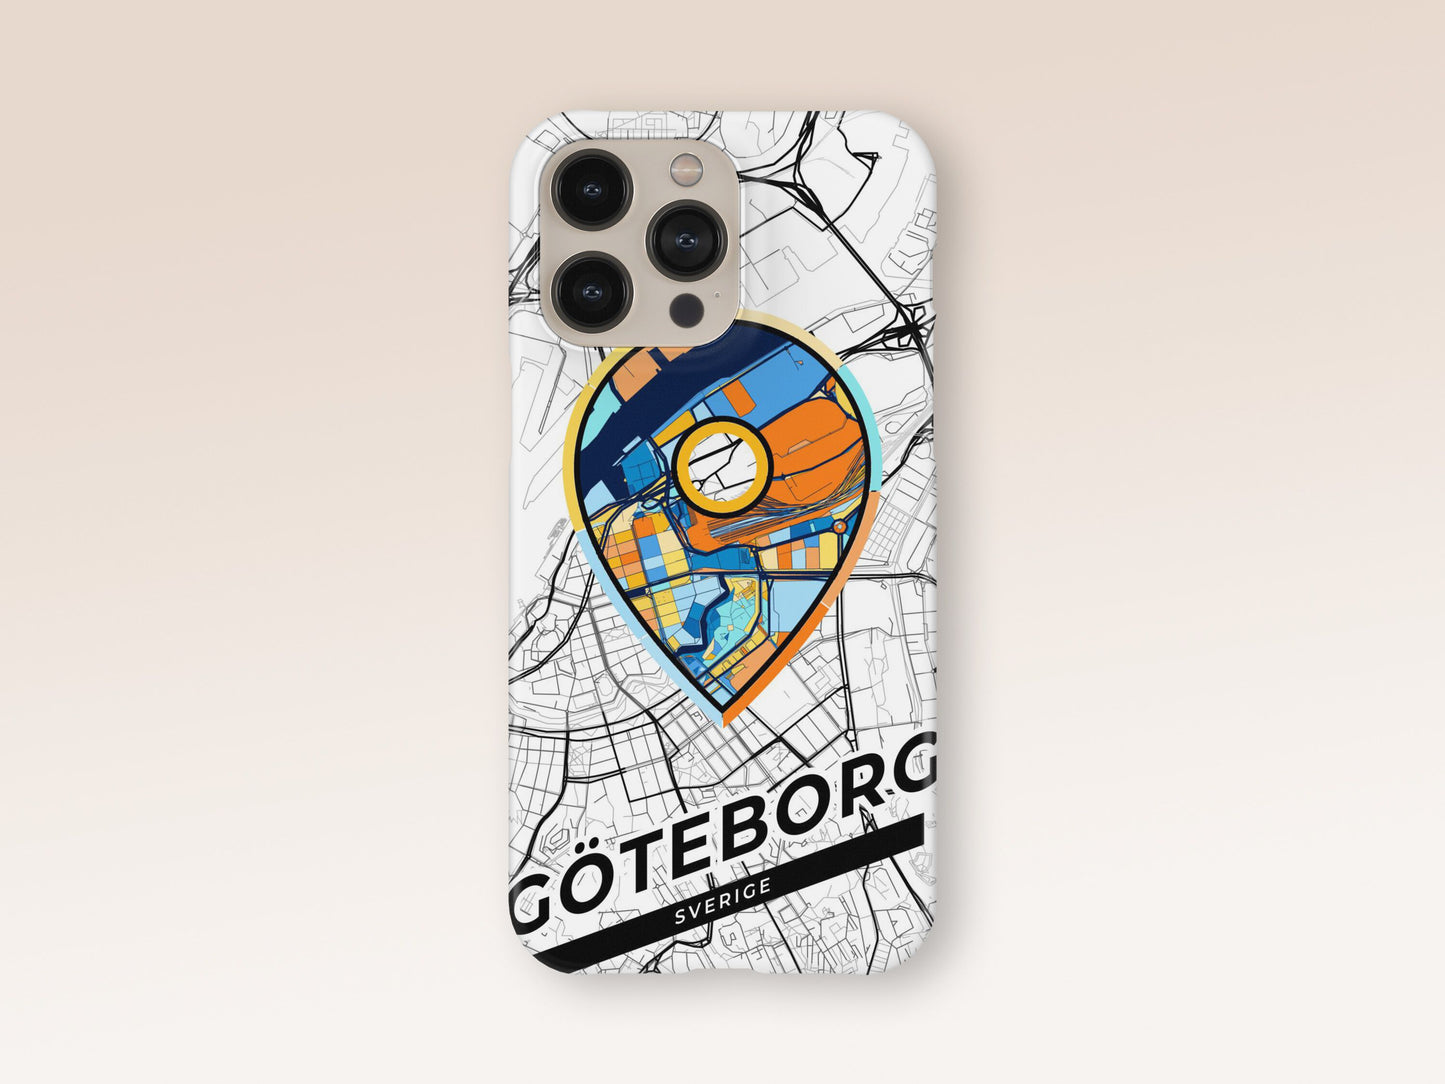 Gothenburg Sweden slim phone case with colorful icon. Birthday, wedding or housewarming gift. Couple match cases. 1